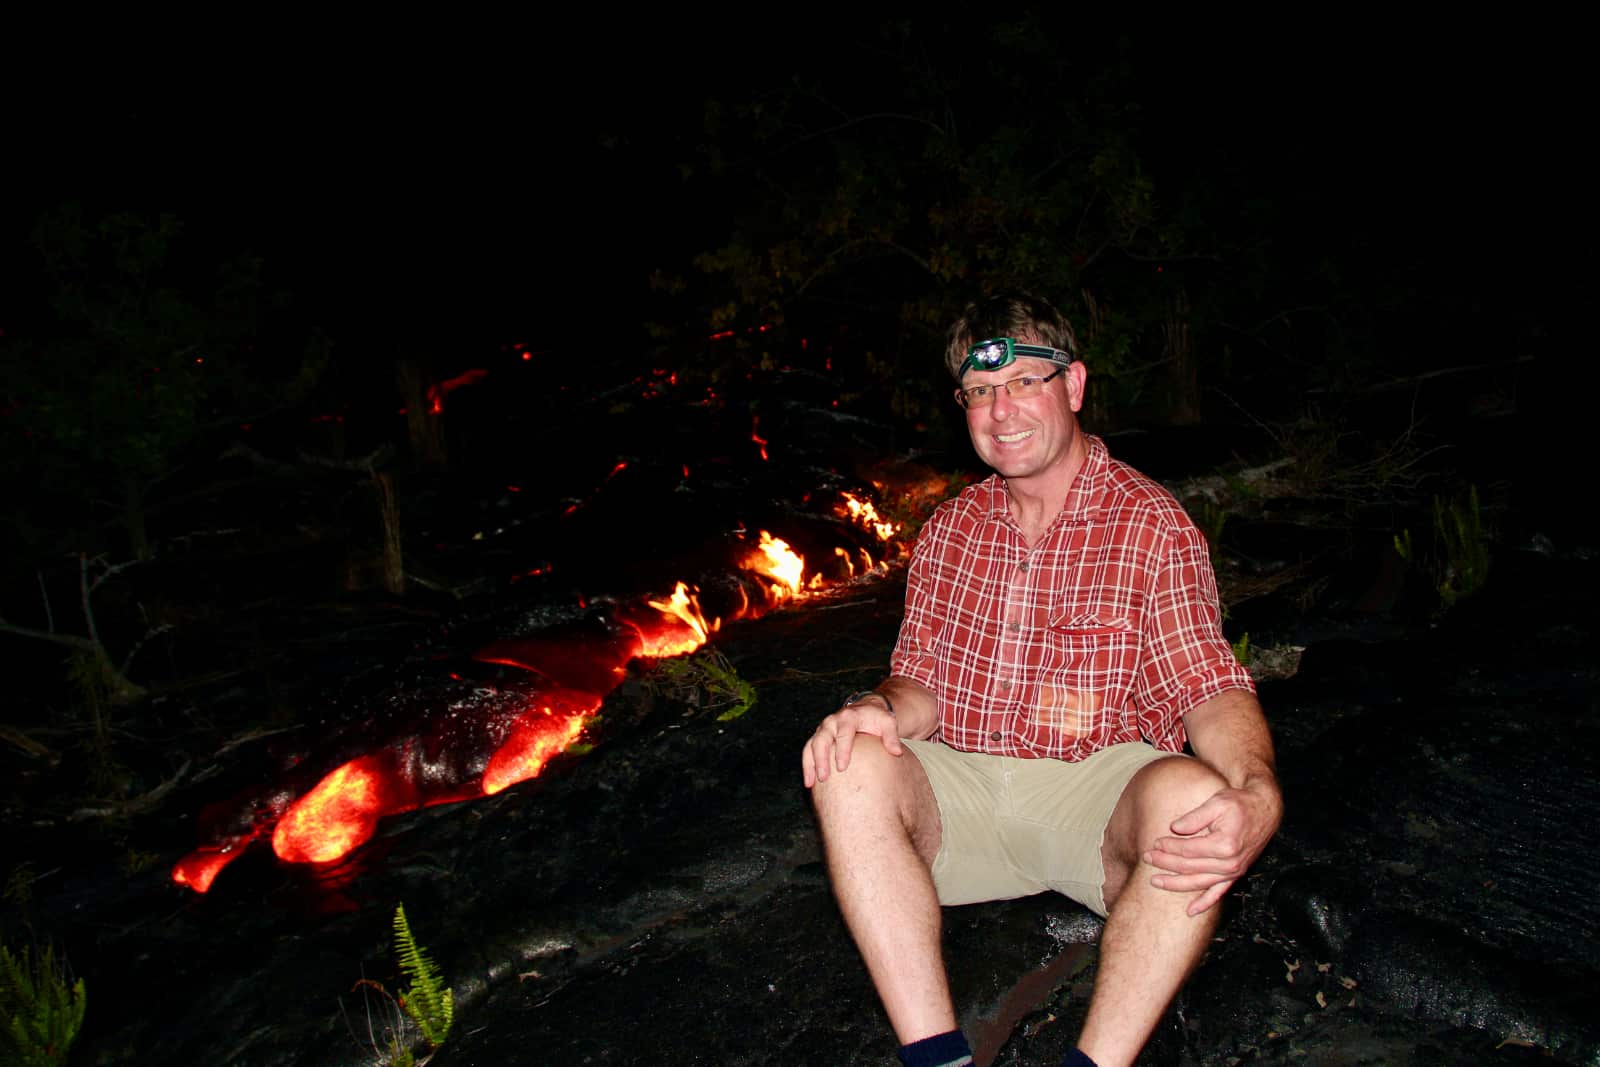 Man smiling in foreground with flowing lava in background